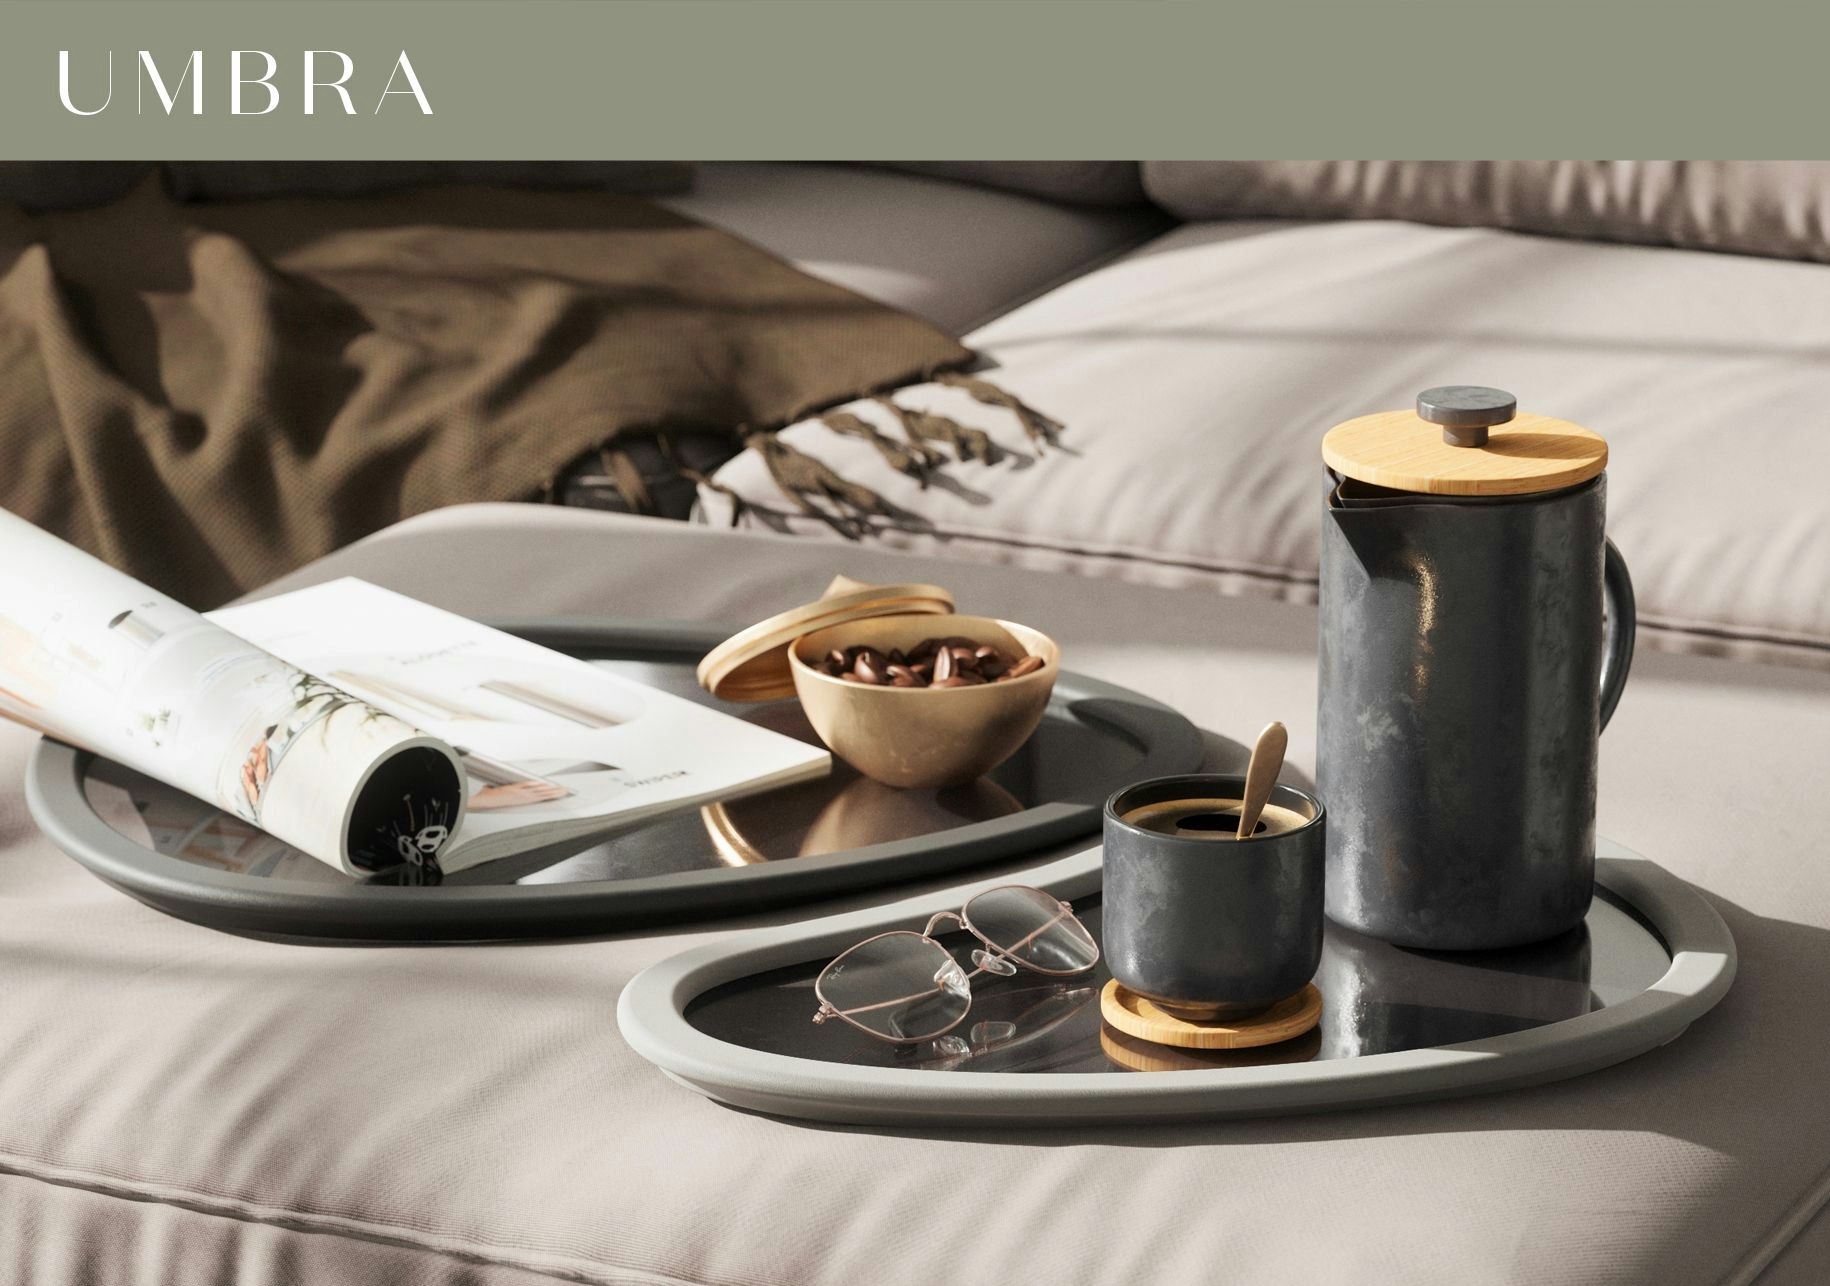 Find your home aesthetic with Umbra